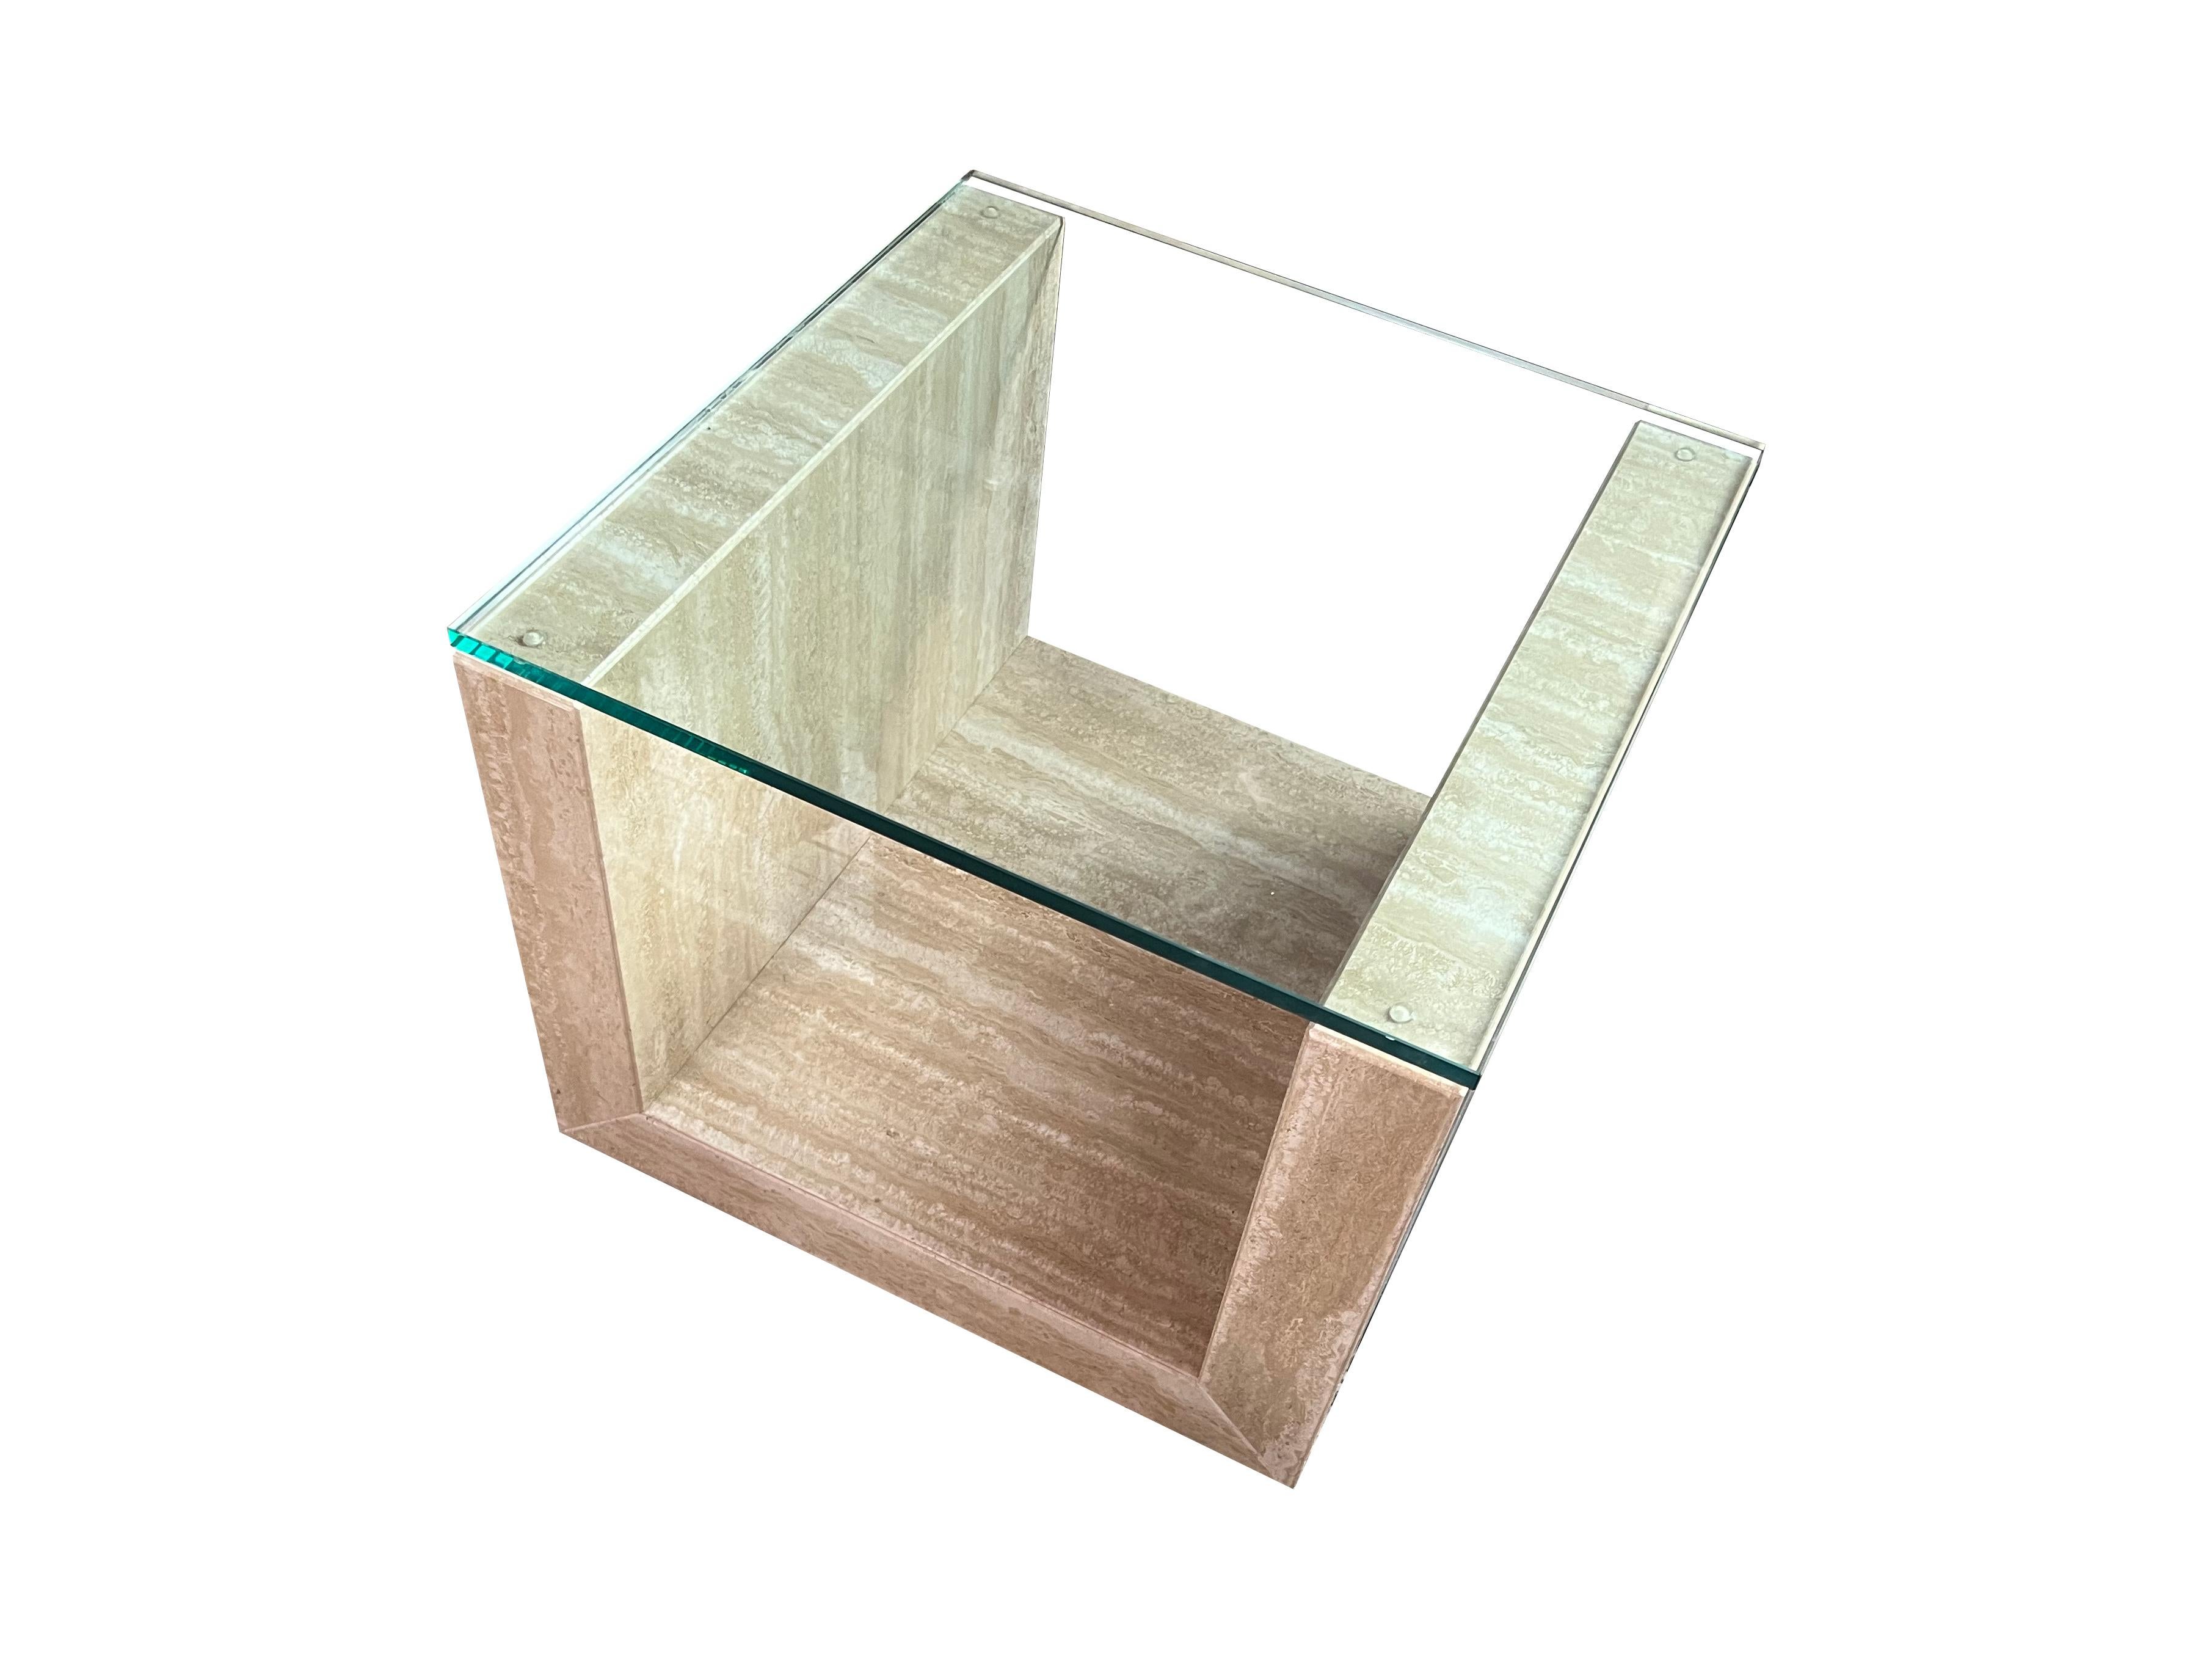 Travertine Marble AMIA Auxiliary Side Table Contemporary Design Meddel in Stock
Travertine marble side table perfect to complement a decorative environment. The structure of this travertine marble side table is 